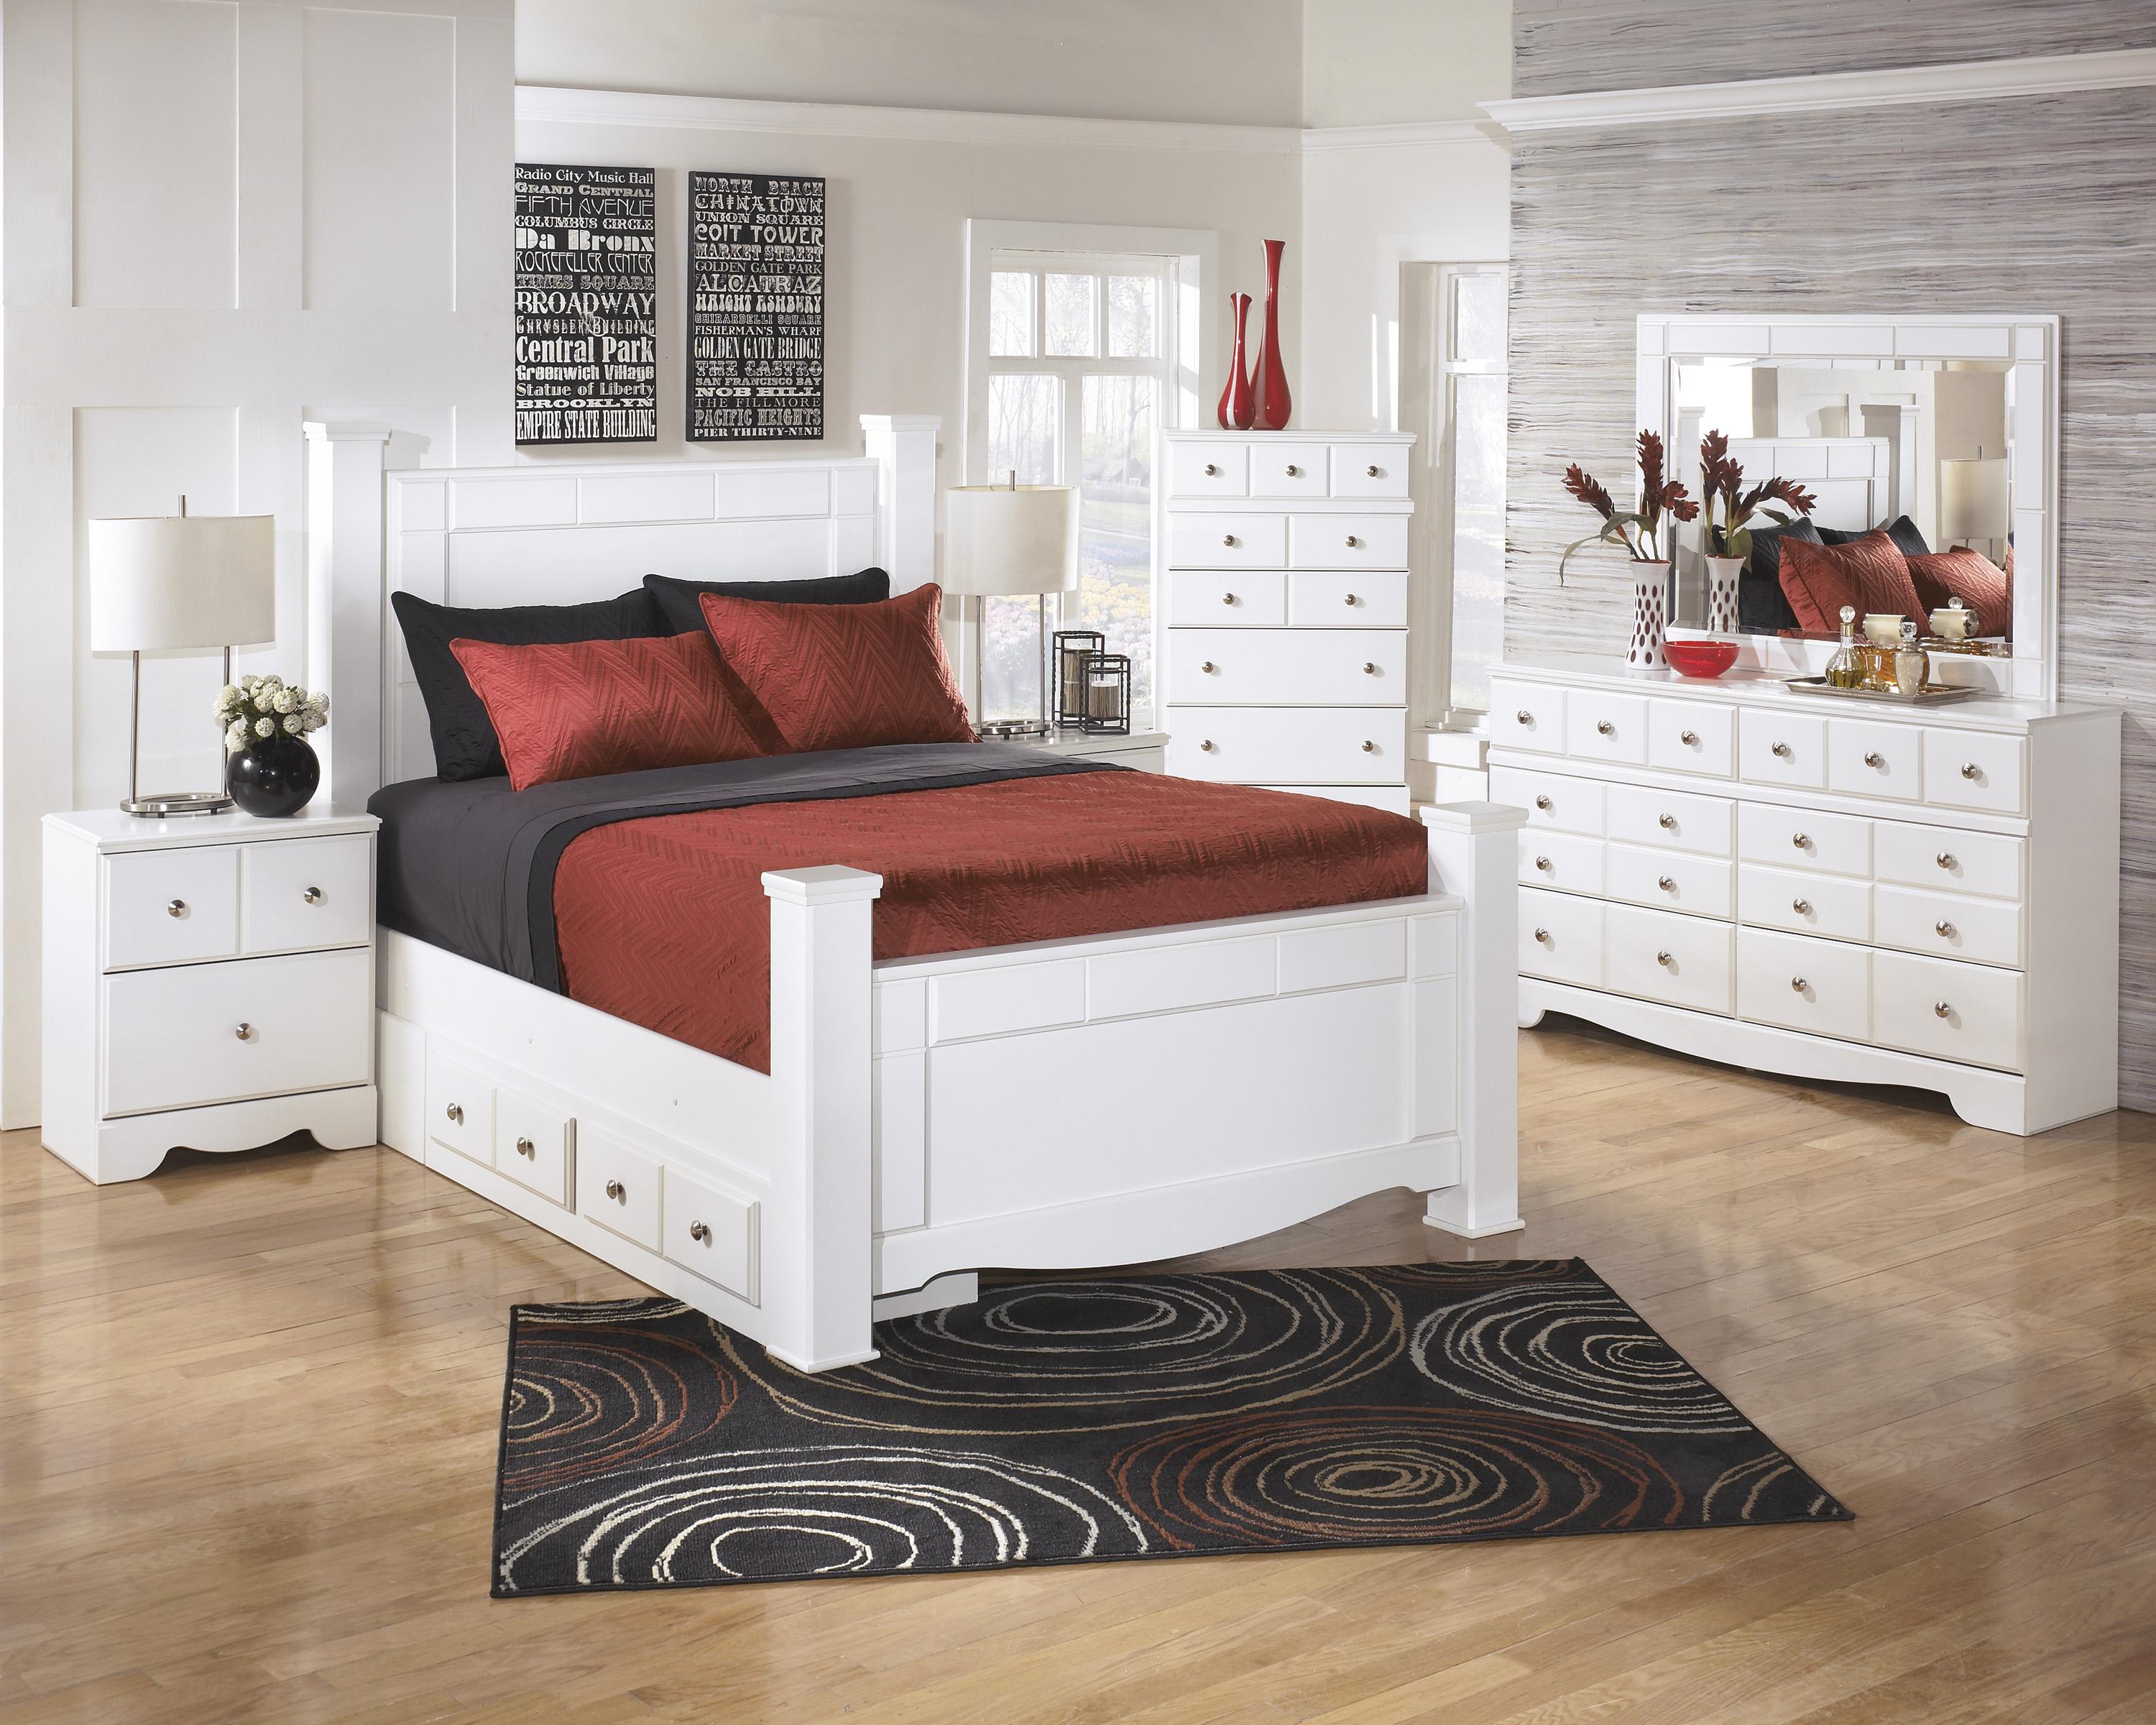 

    
Ashley Weeki B270 Queen Size Poster Bedroom Set 6pcs in White
